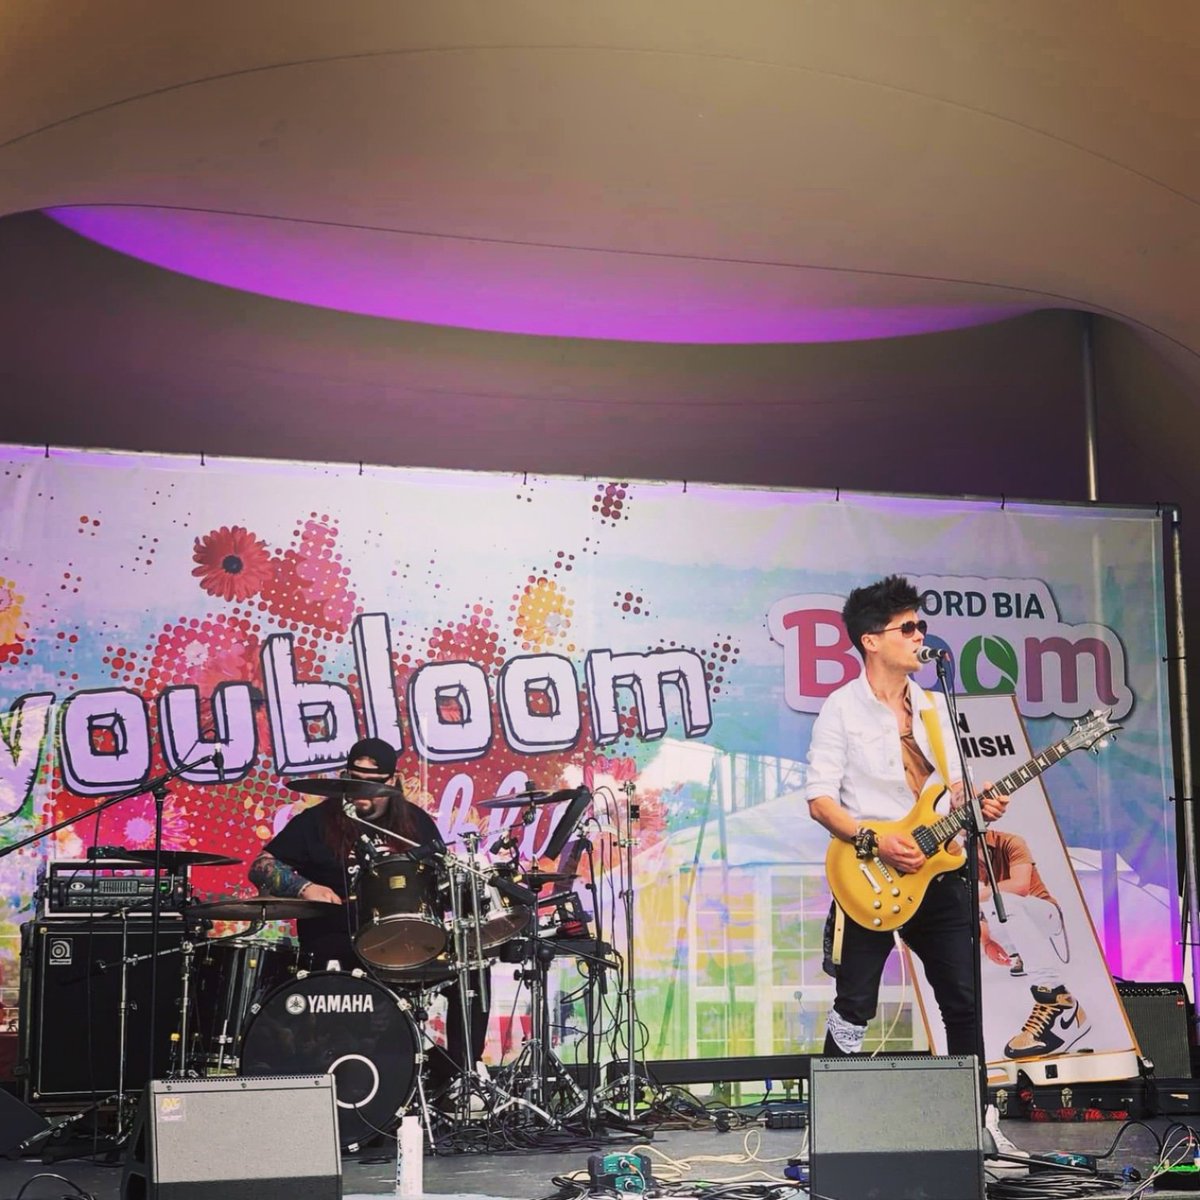 We had such a great time at @youbloom at @BordBiaBloom on Friday! 😁 Thanks a million to those who came to see us ❤ And shoutout to @HazeyLake for looking after us on the day! 📷: @Shannon_Rawrx